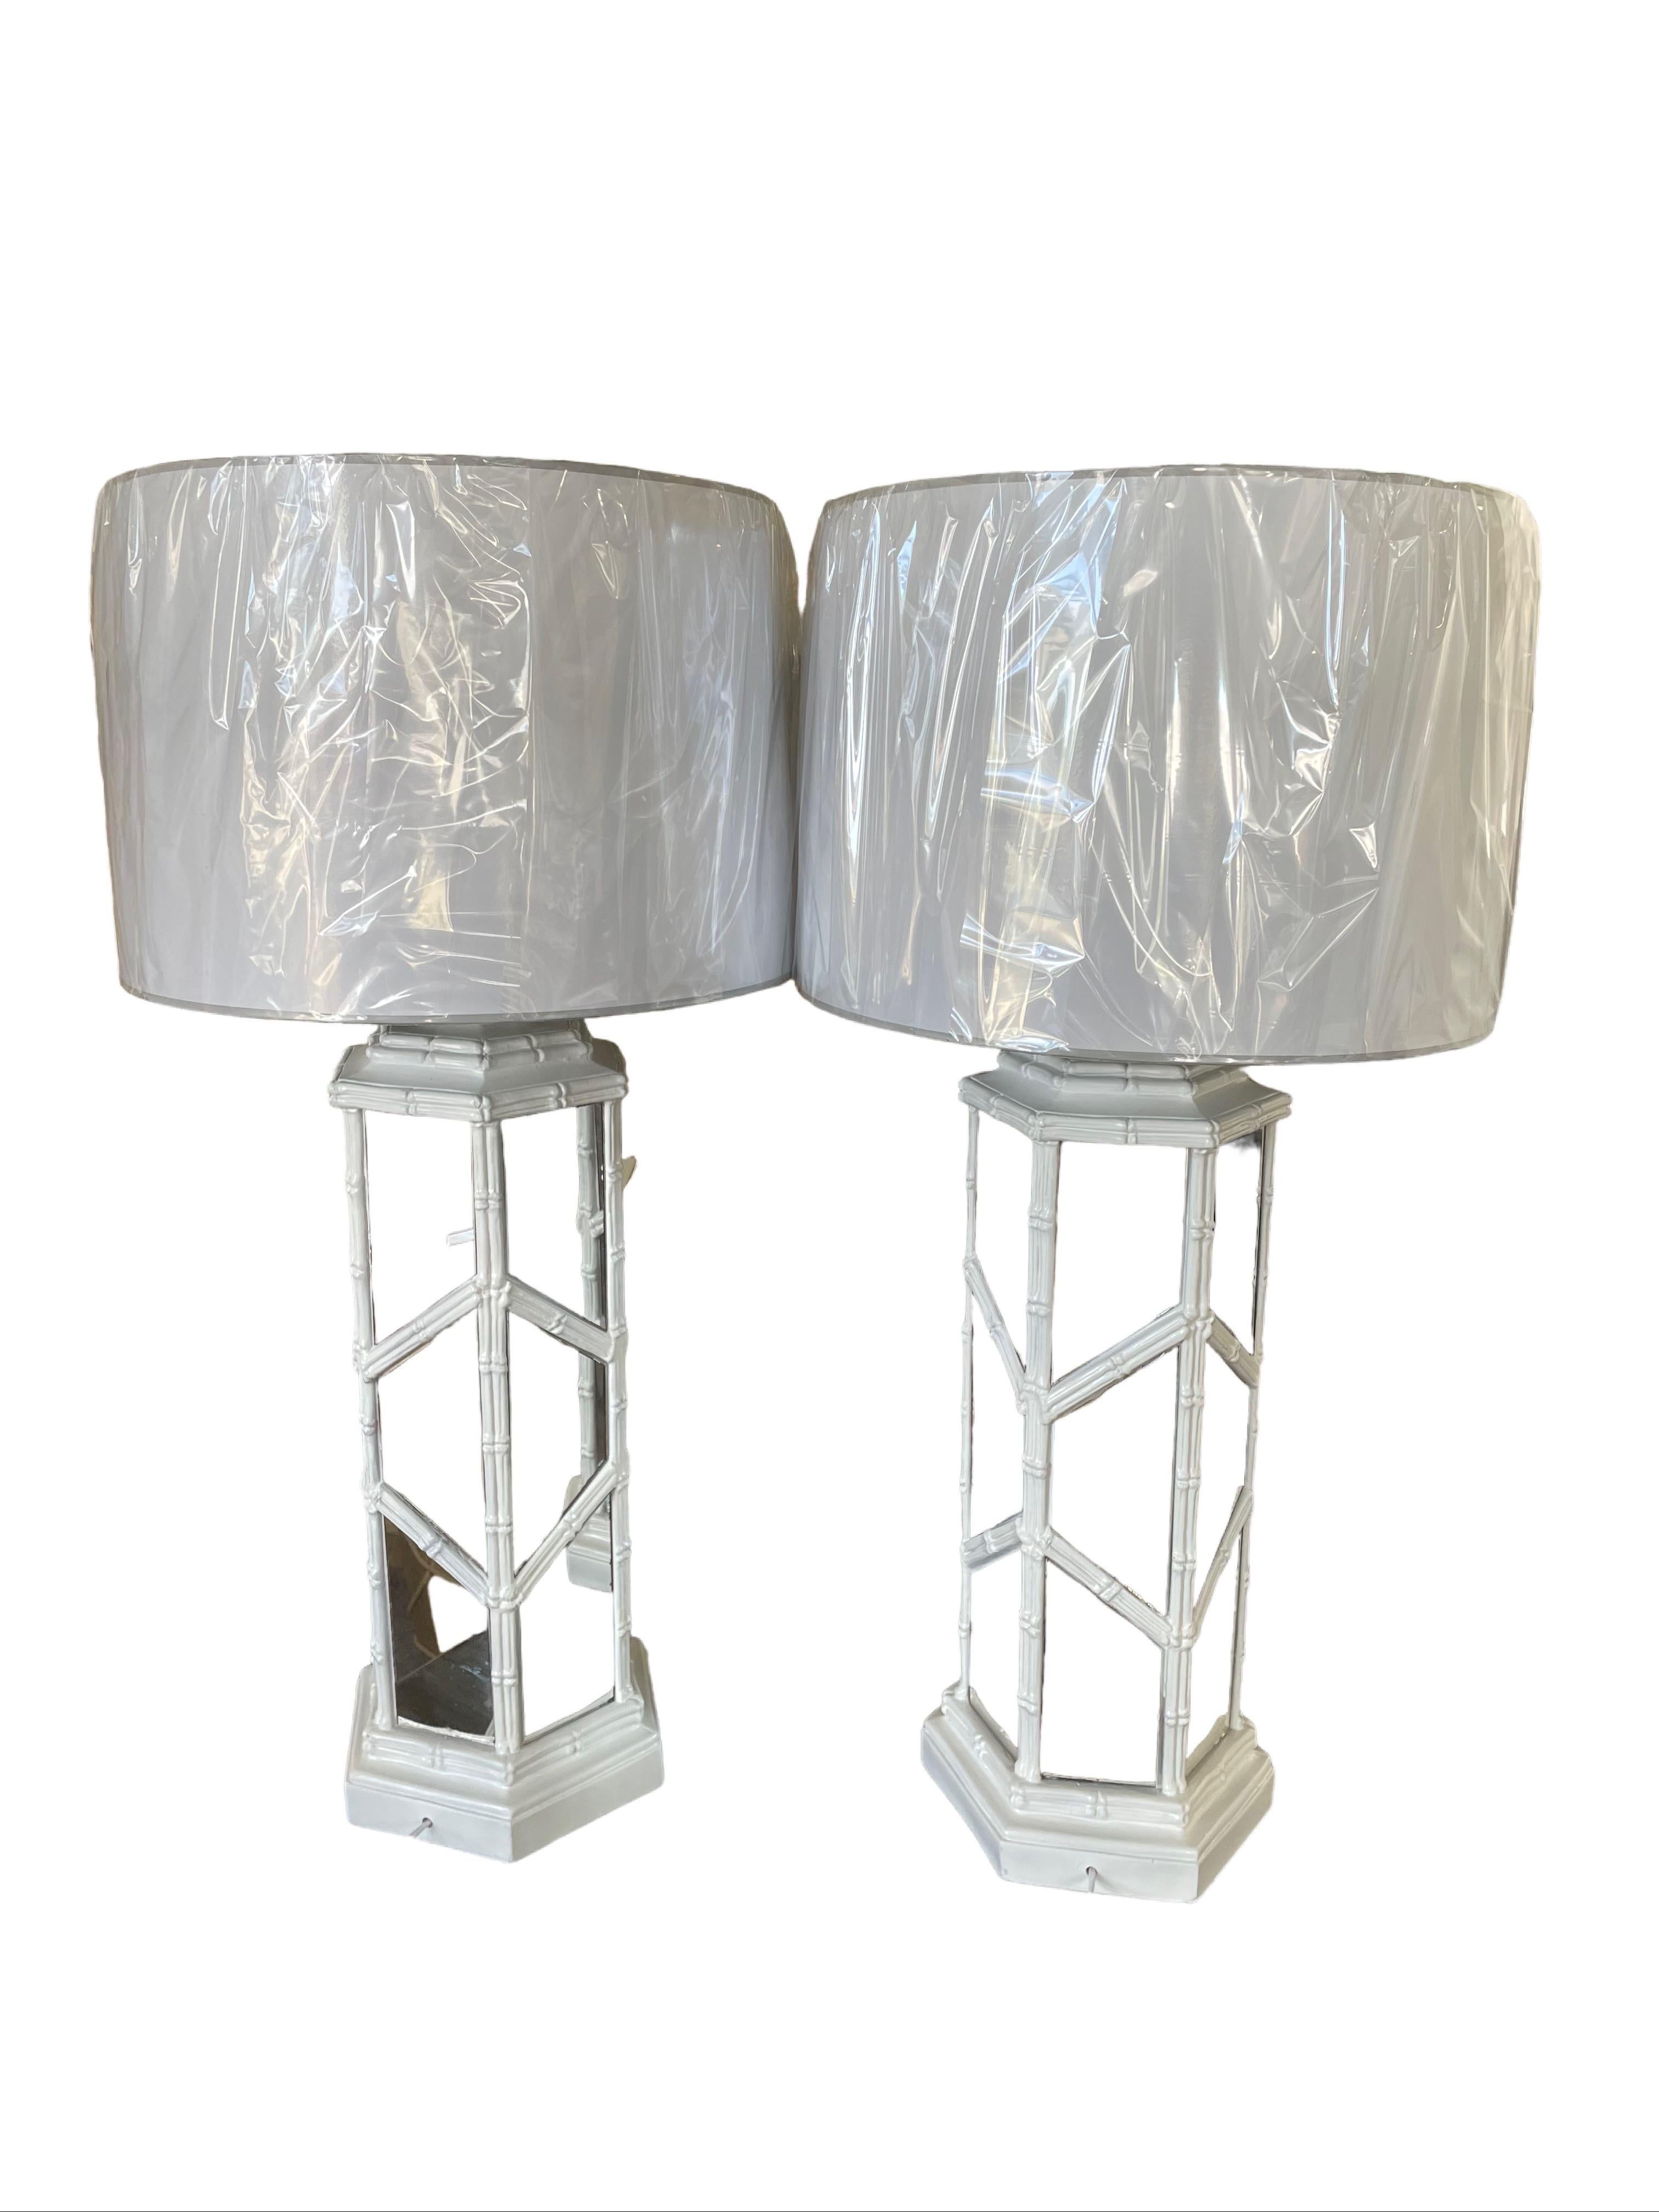 A stunning pair of vintage lamps boast a distinctive combination of faux bamboo and mirrored inlay. The classic crisscross bamboo design in white sets off the many mirrored inlaid sections thus enhancing the lamps’ lighting qualities. With classic